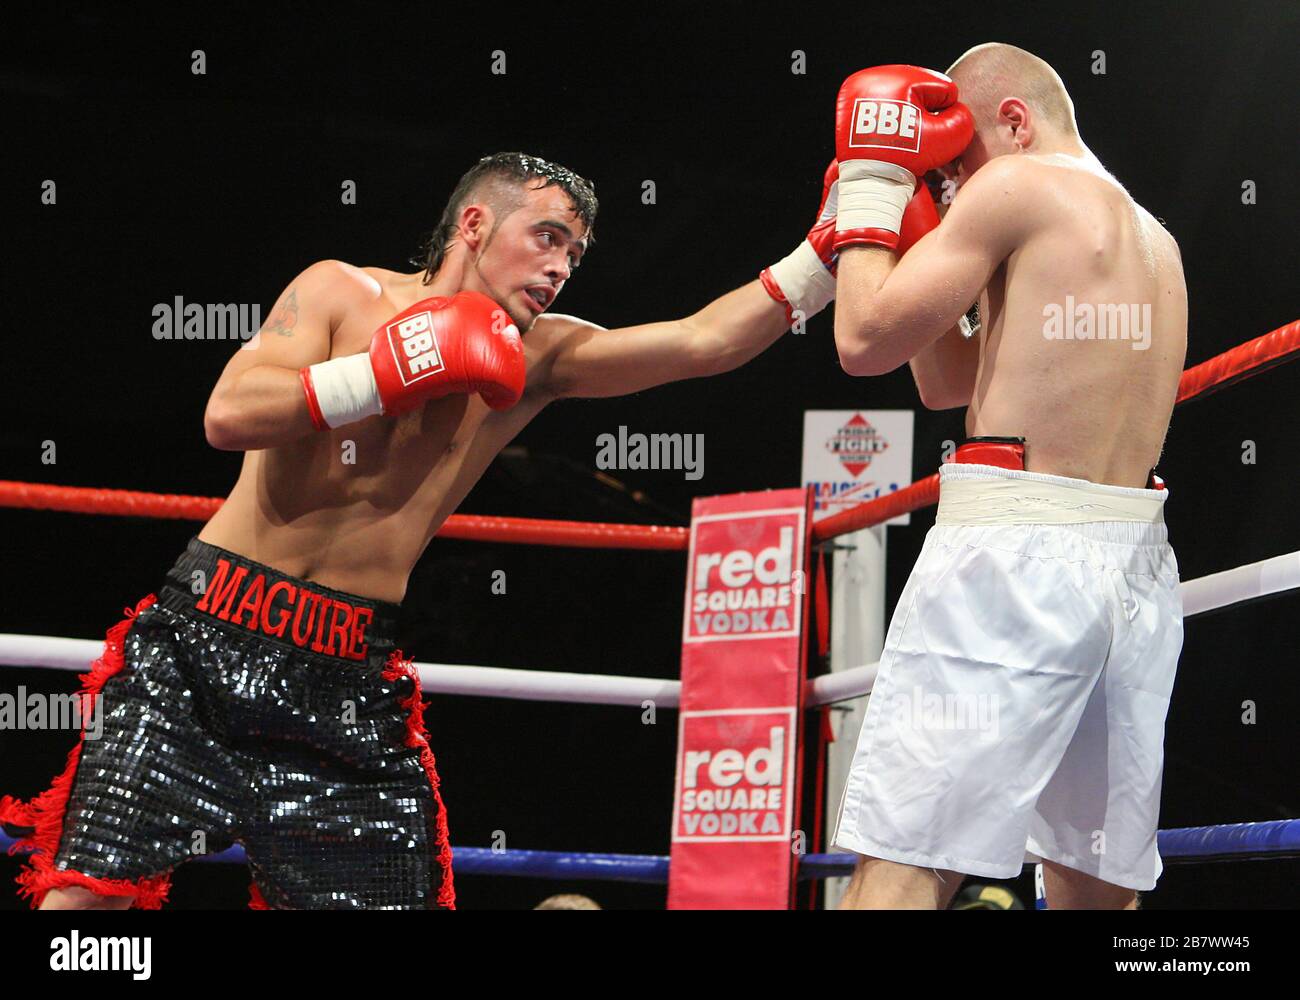 Michael Maguire (black/red shorts) defeats Pavels Senkovs in a Super-Bantamweight boxing contest at the Brentwood Centre, promoted by Frank Maloney Stock Photo